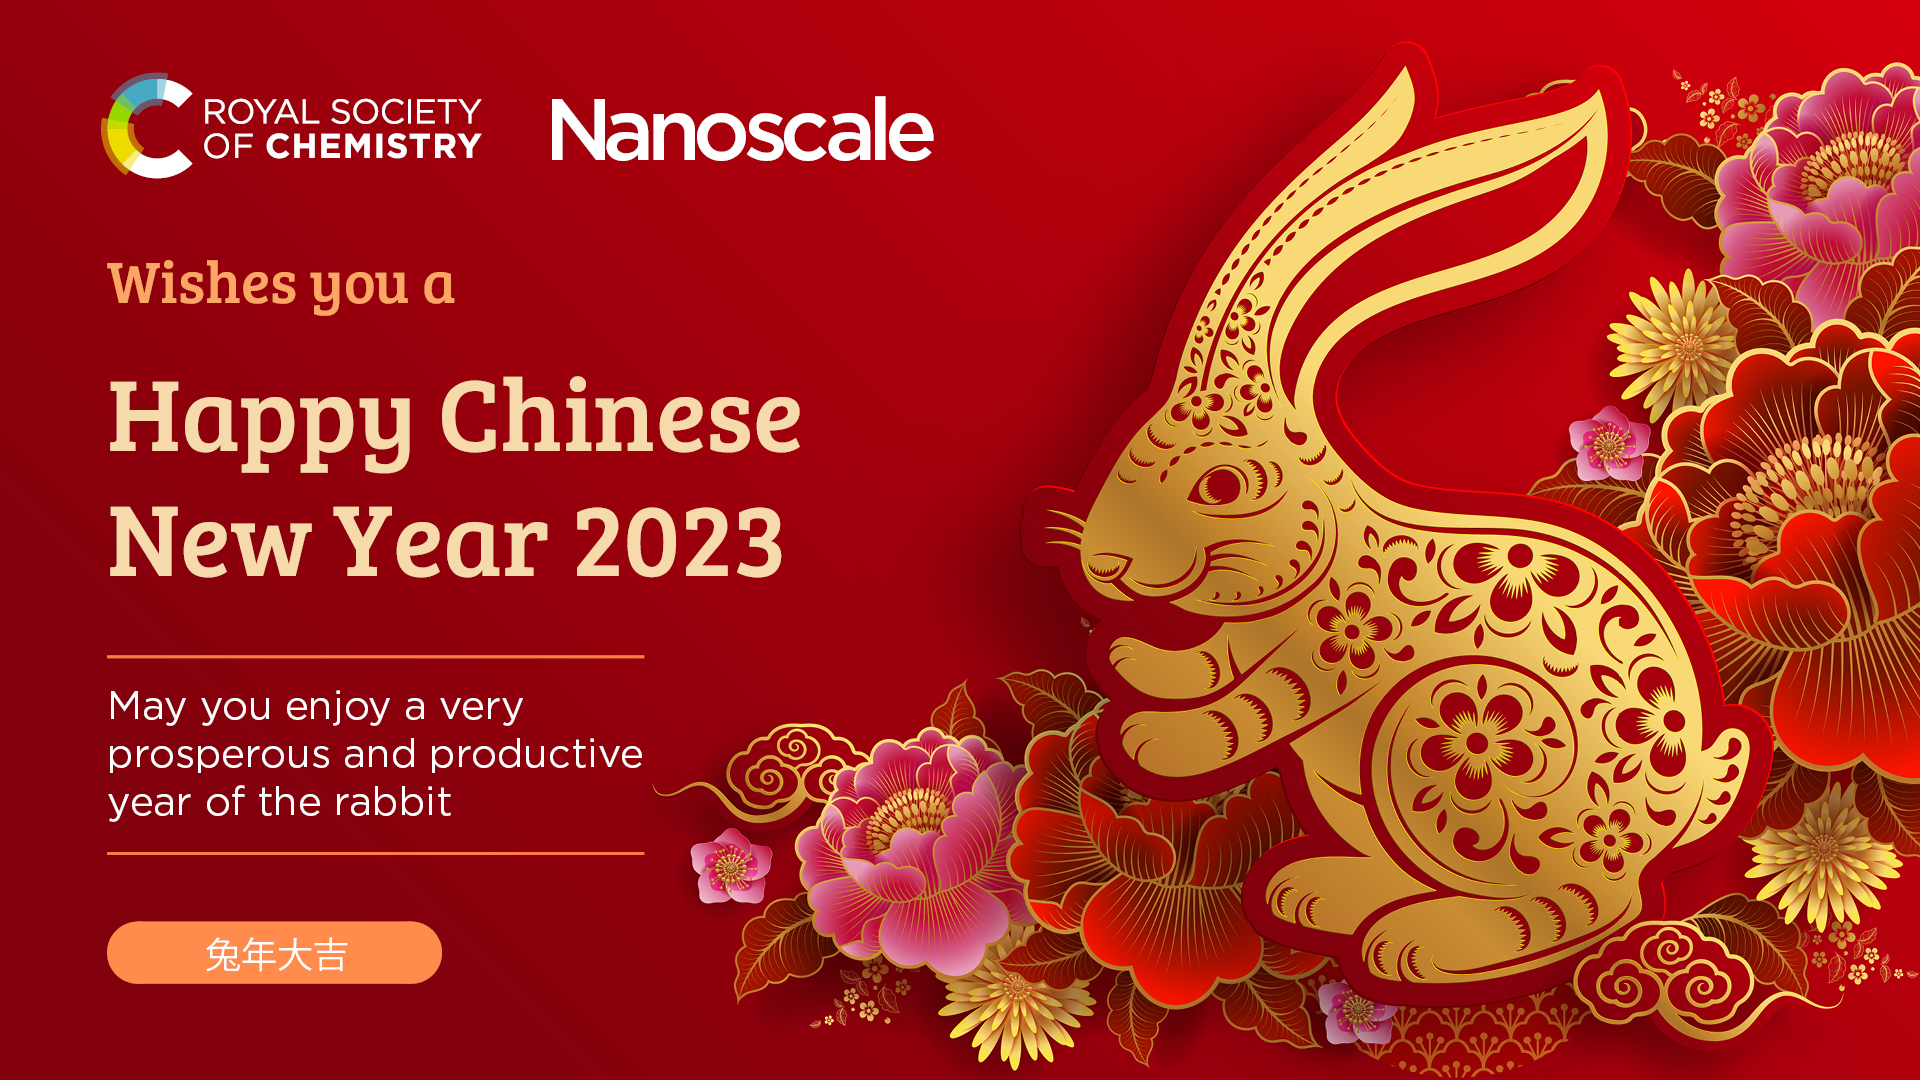 Nanoscale Chinese New Year promotional graphic with a red background and an image of a gold rabbit surrounded by flowers. Text reads: "Nanoscale Wishes you a Happy Chinese New Year 2023, May you enjoy a very prosperous and productive year of the rabbit".